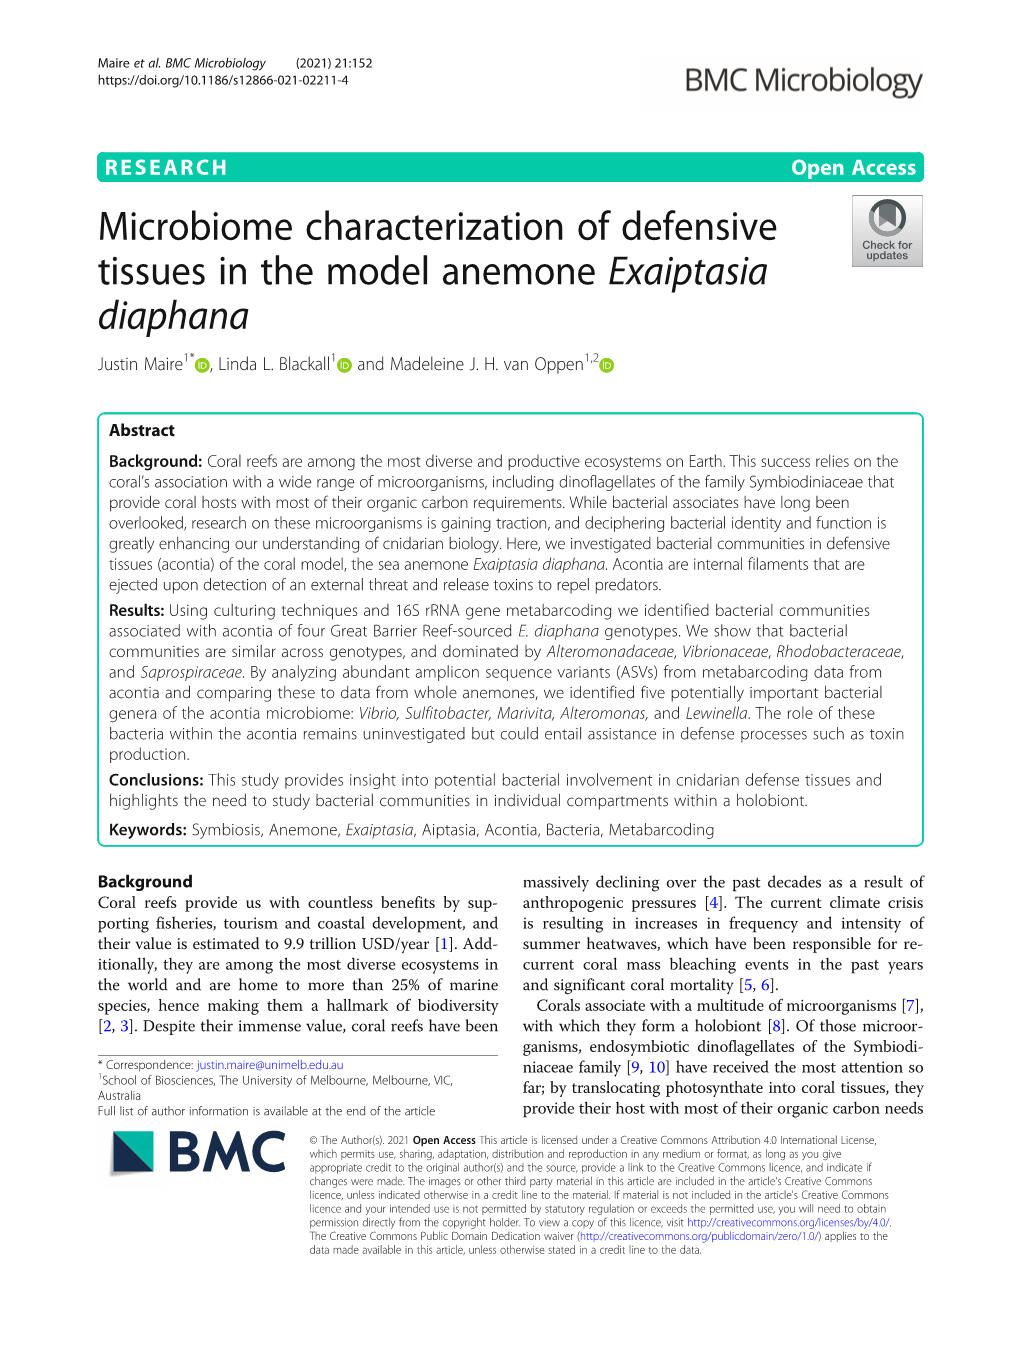 Microbiome Characterization of Defensive Tissues in the Model Anemone Exaiptasia Diaphana Justin Maire1* , Linda L